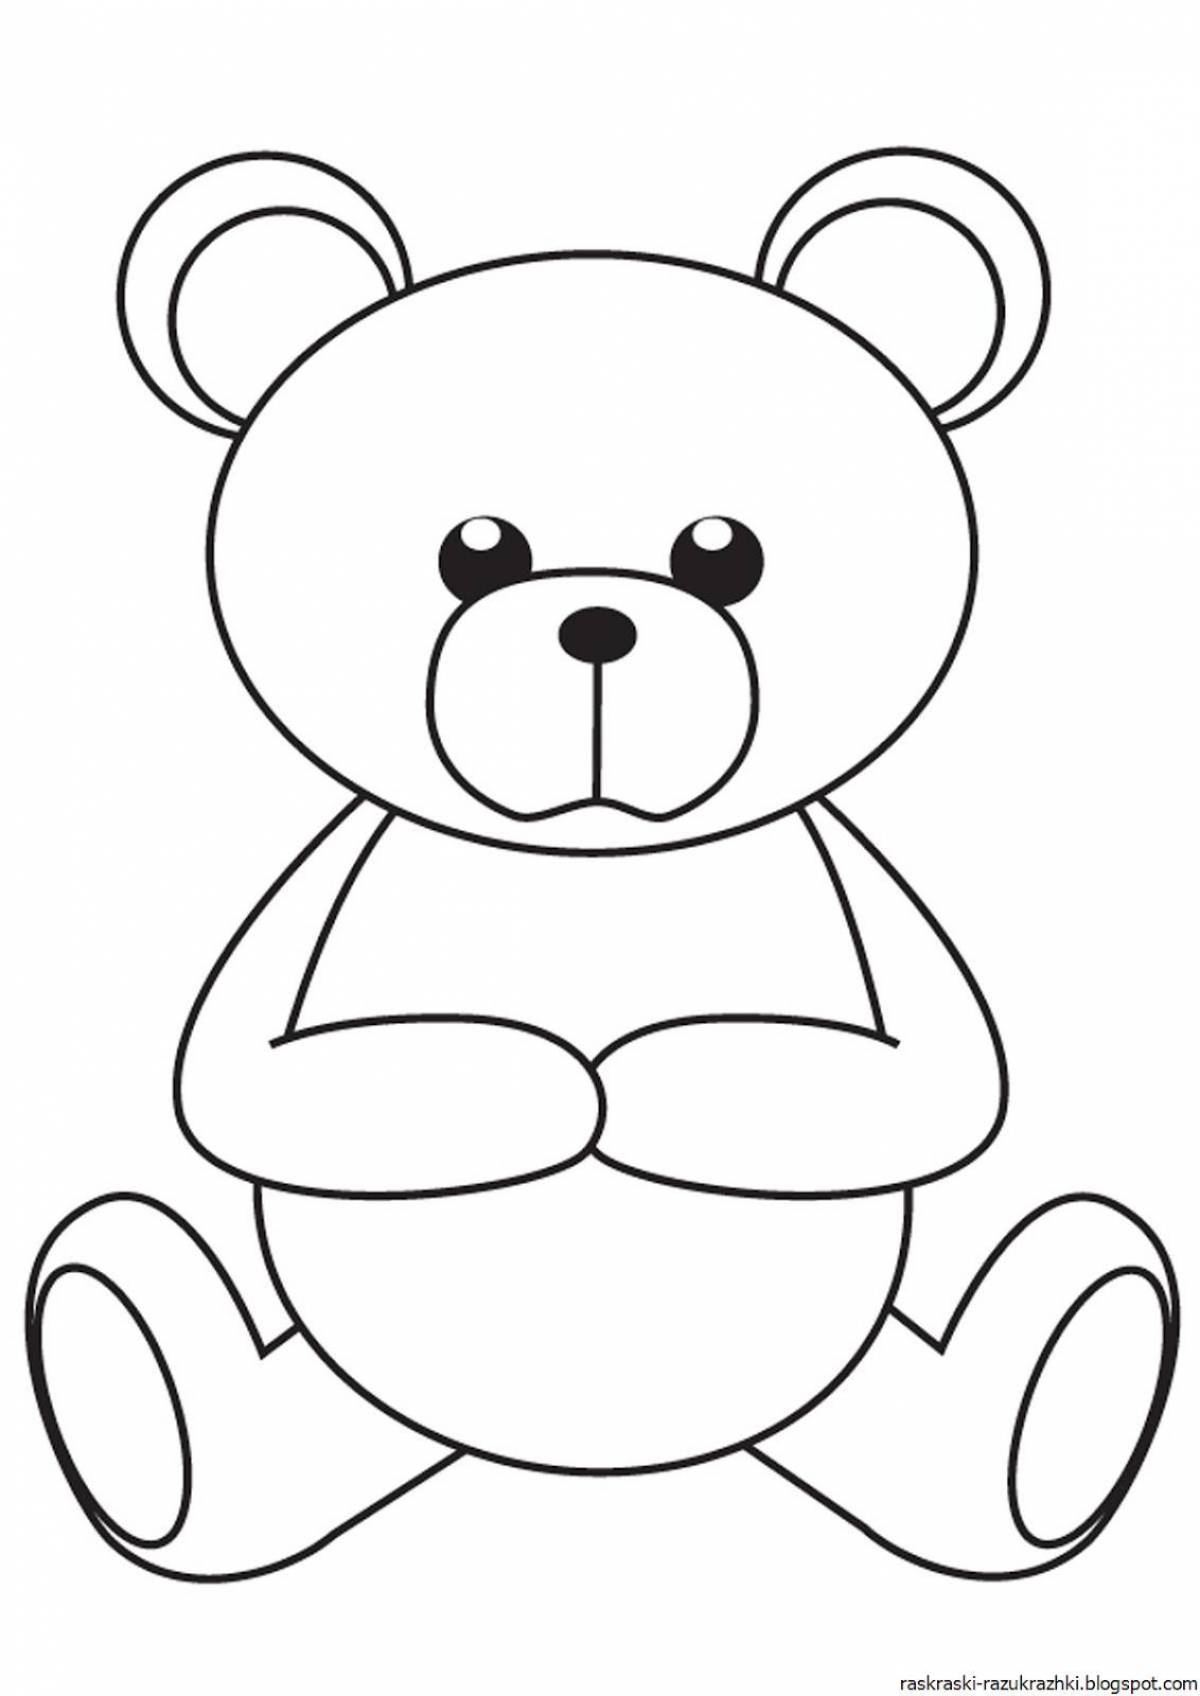 Playful coloring bear for children 3-4 years old